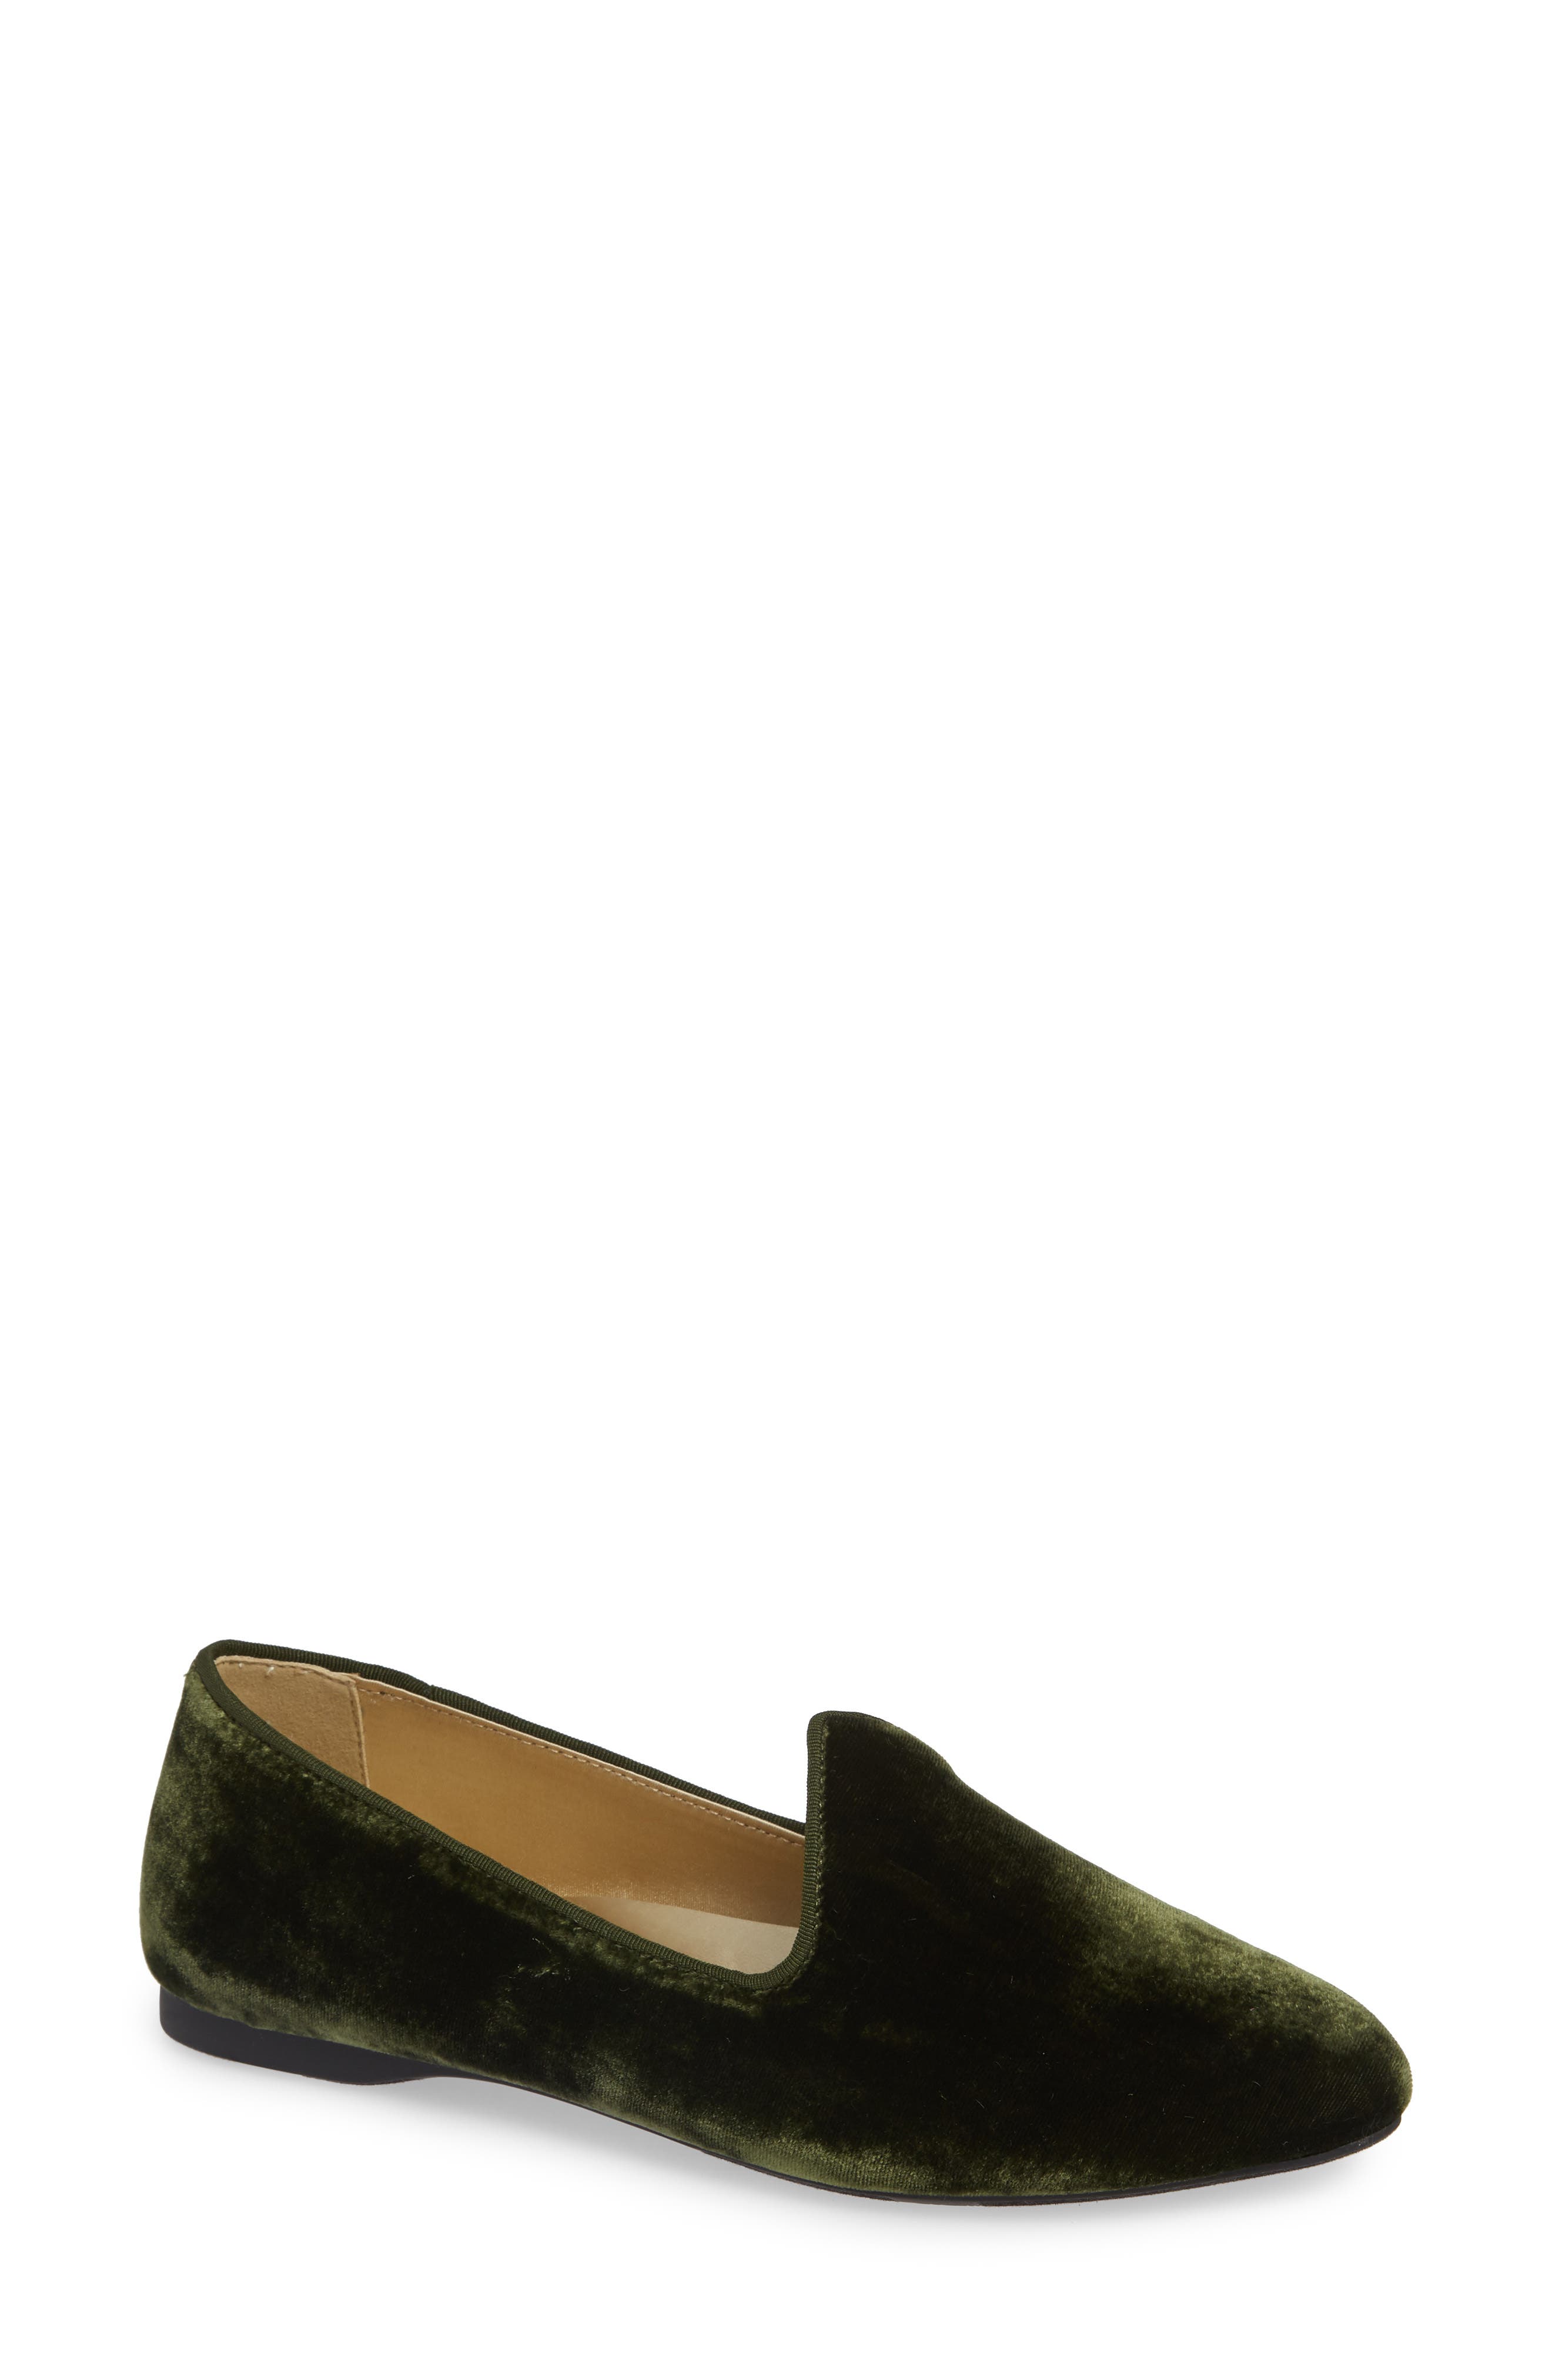 hunter green loafers